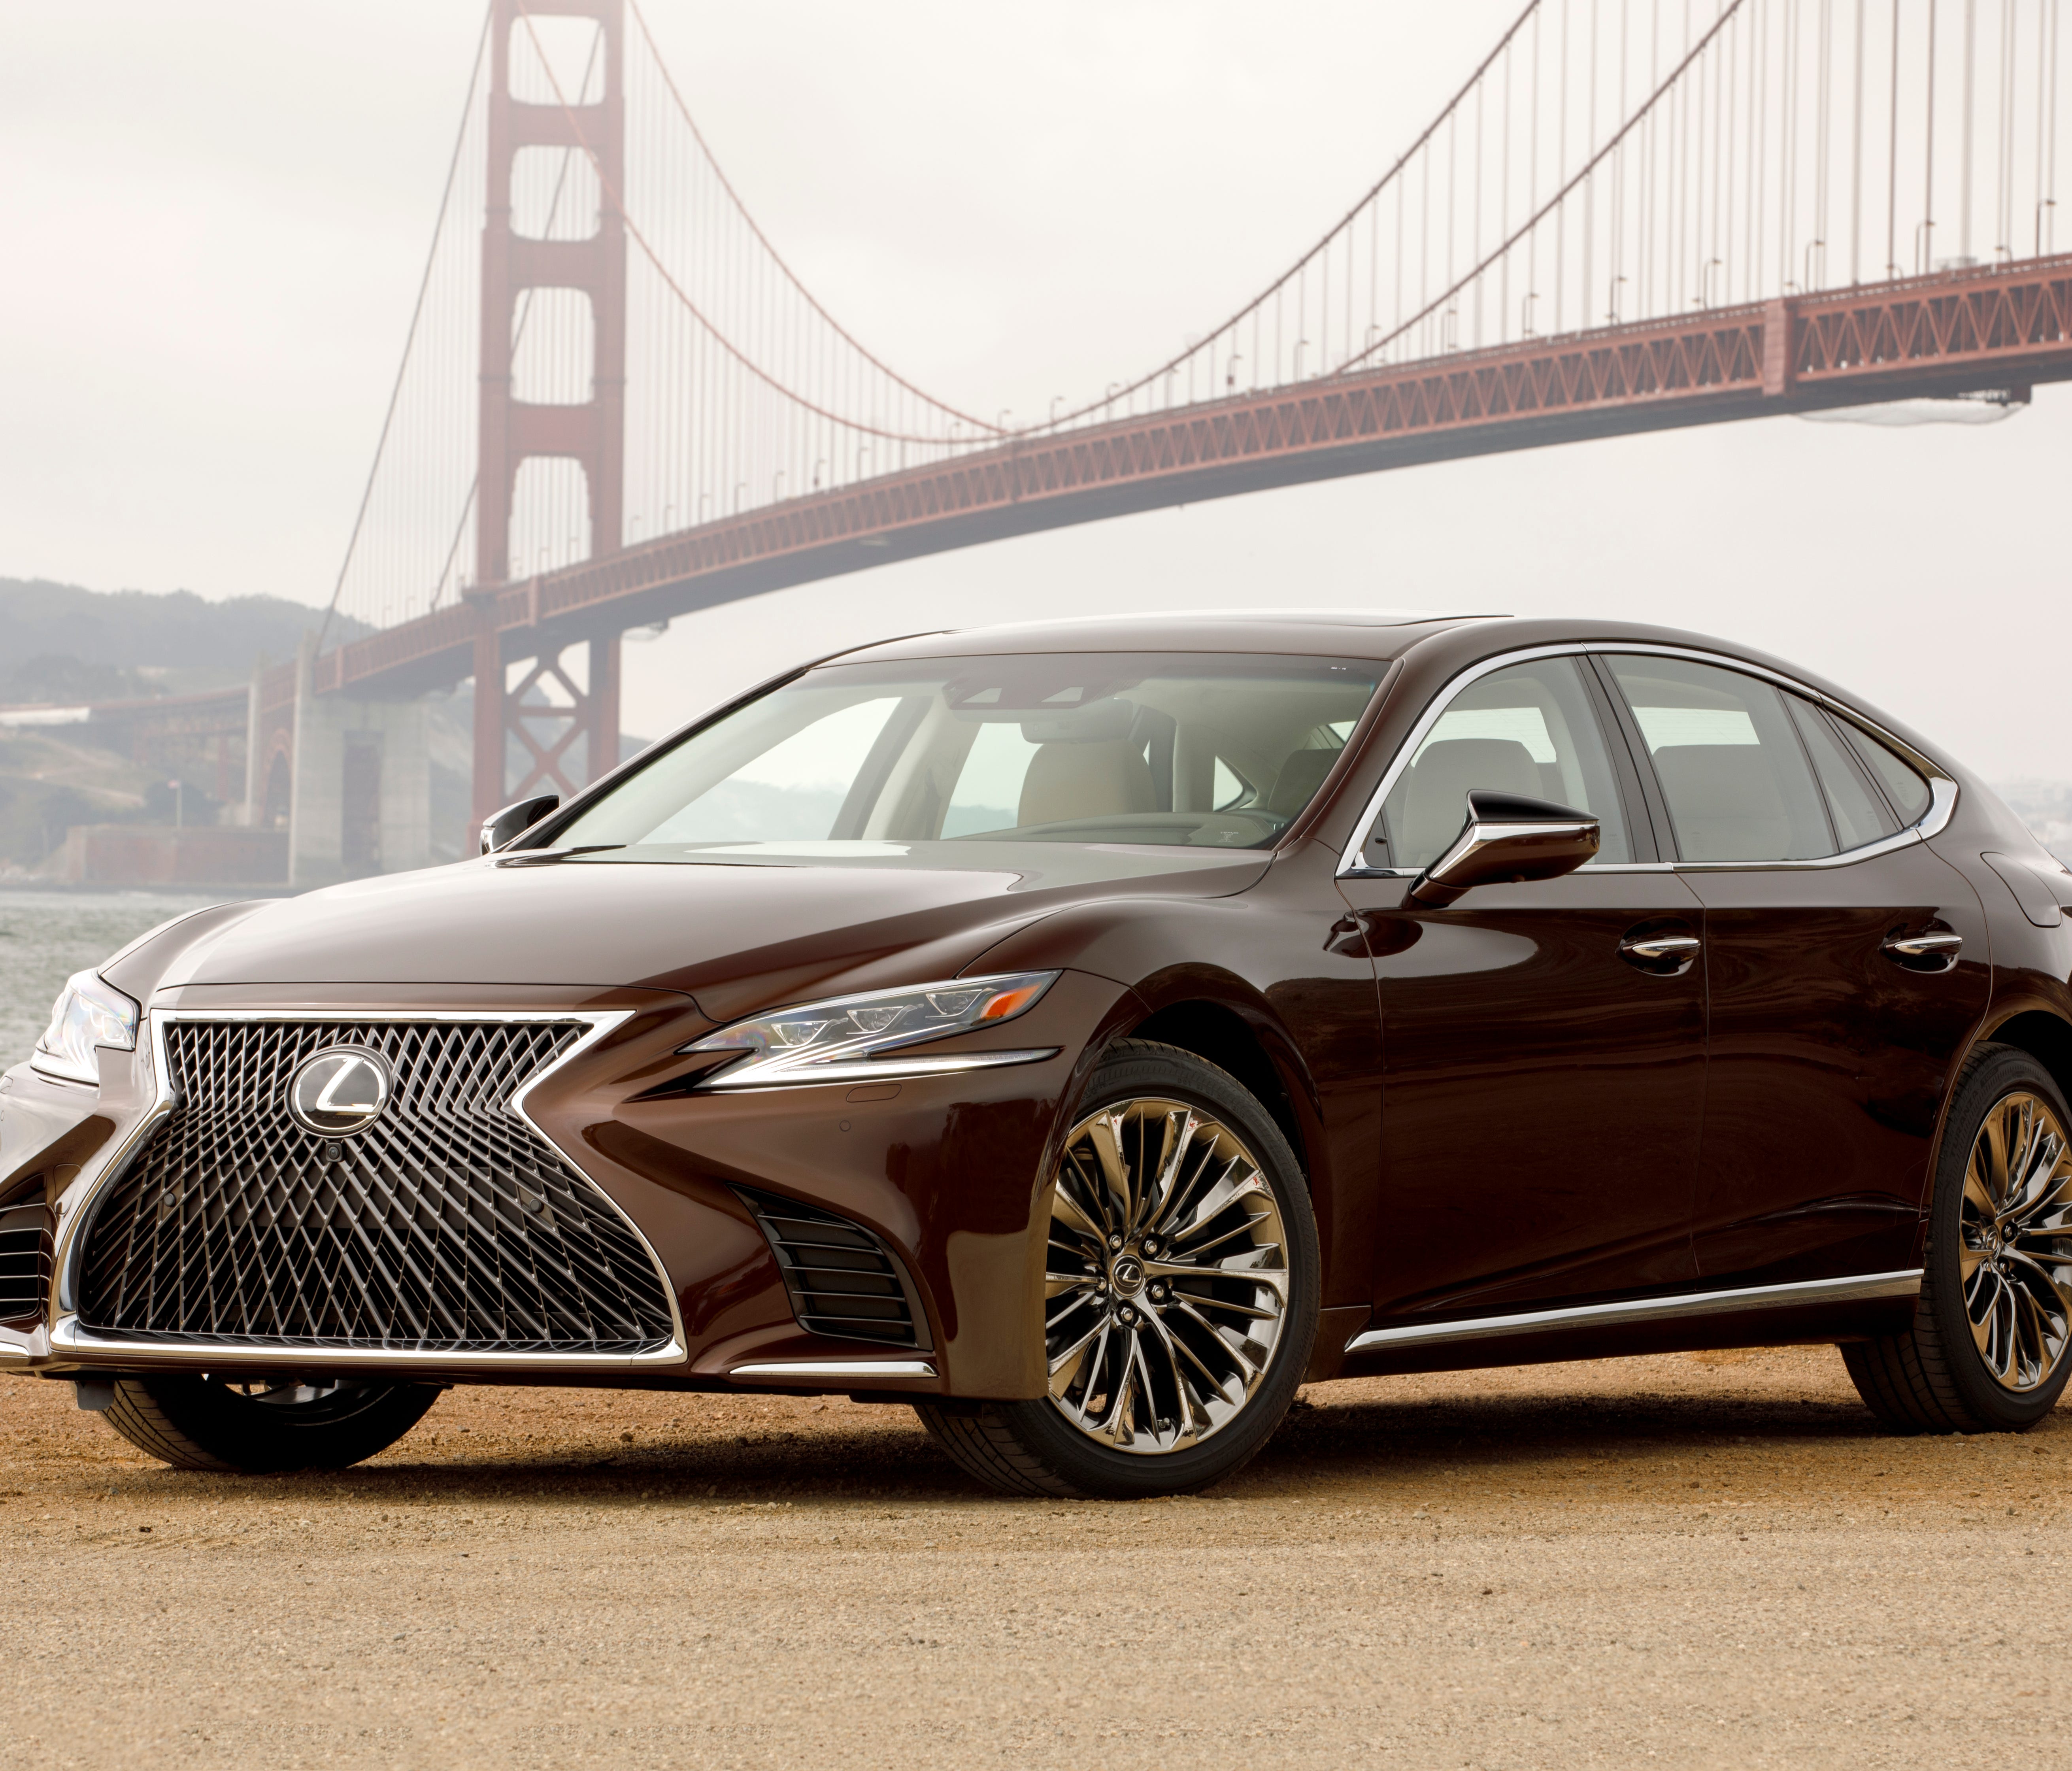 The redesigned Lexus LS 500 features swooping design touches that aren't to everyone's liking, including a front grille that seems cavernous for this front end.